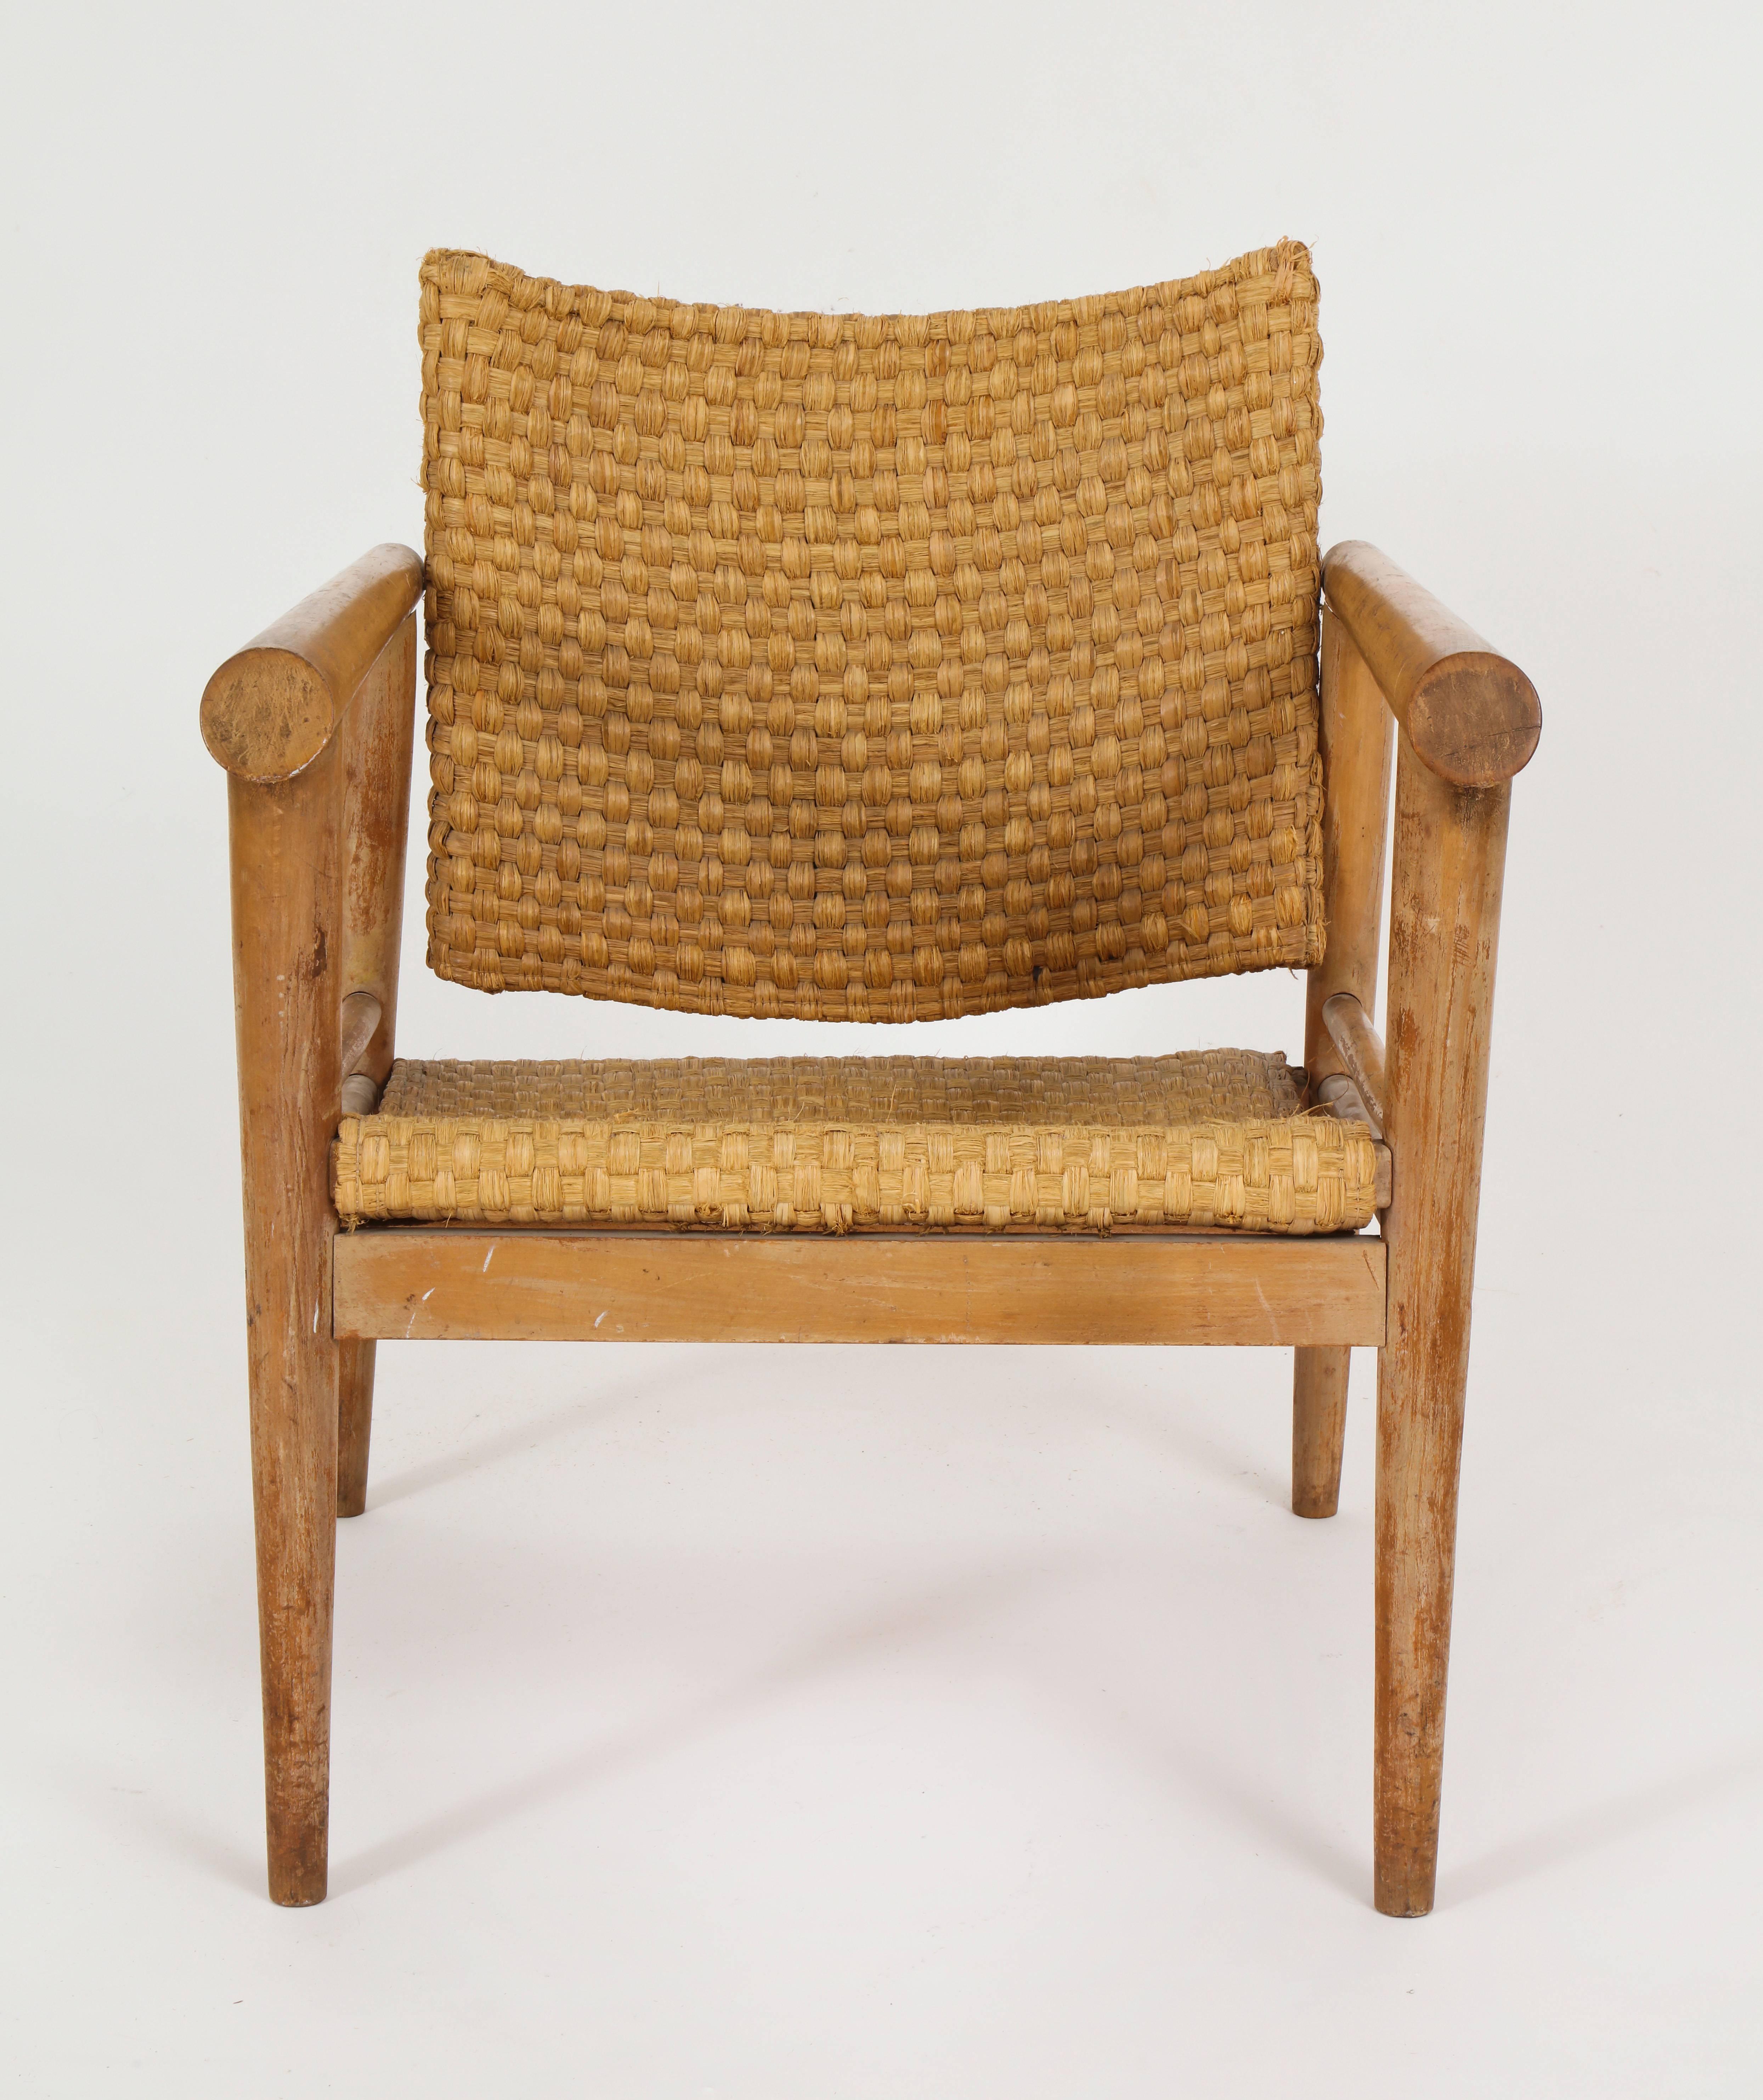 woven straw chair